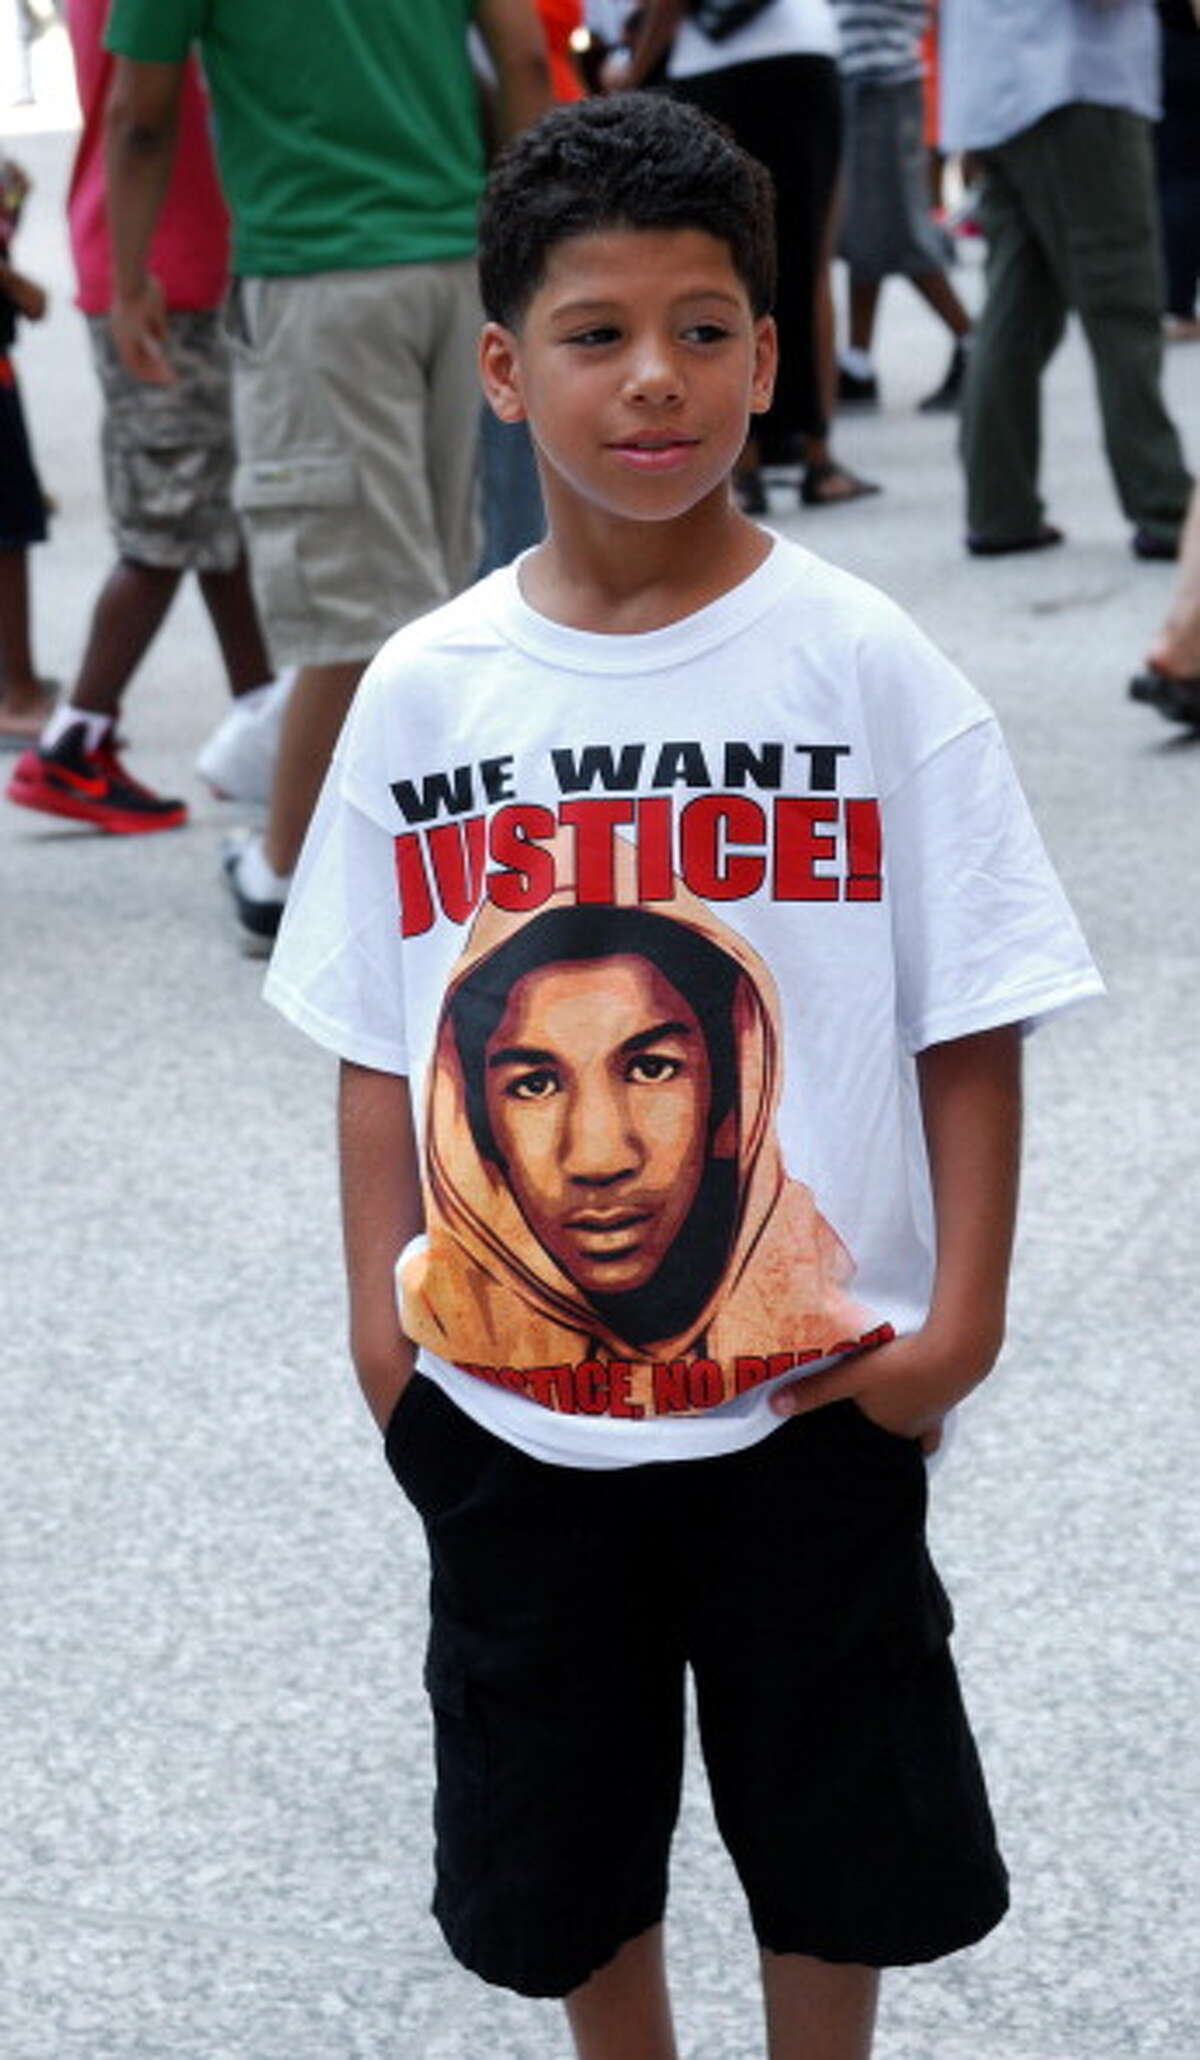 Trayvon Martin (pictured on shirt) ranks in at number 9 US trending people.